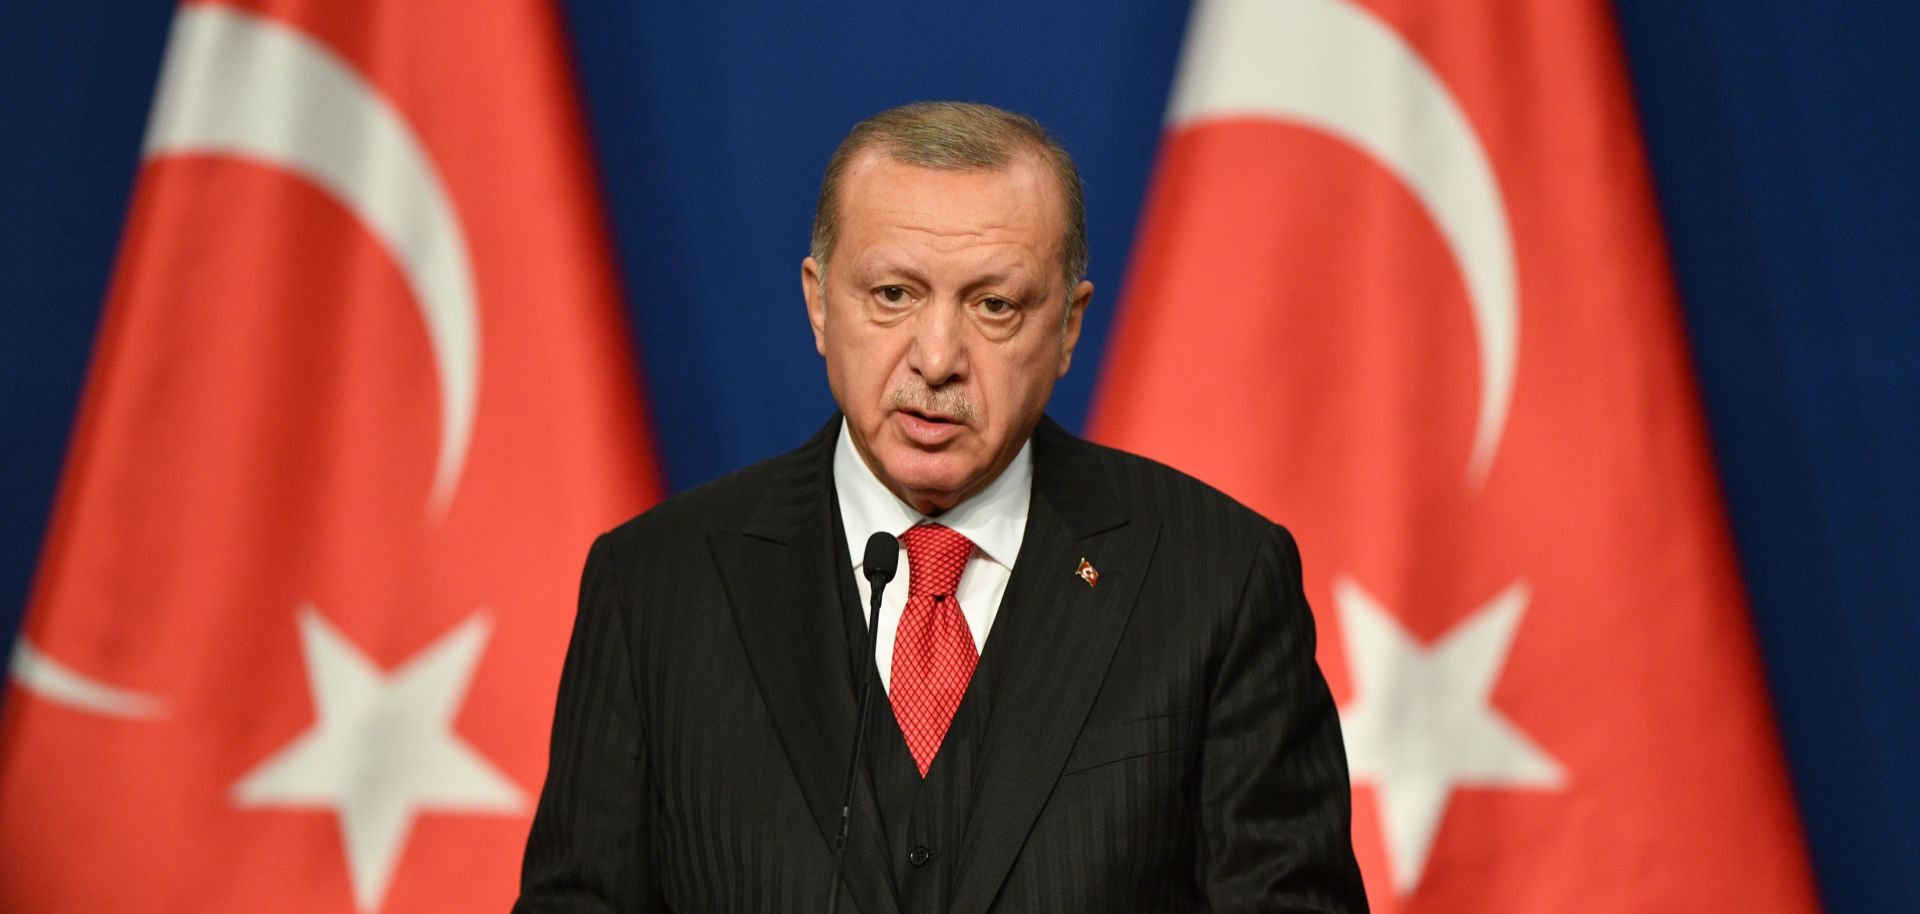 The strategies pursued by Turkish President Recep Tayyip Erdogan may have alienated some of the country's traditional allies, but they have boosted his nationalist credentials at home.